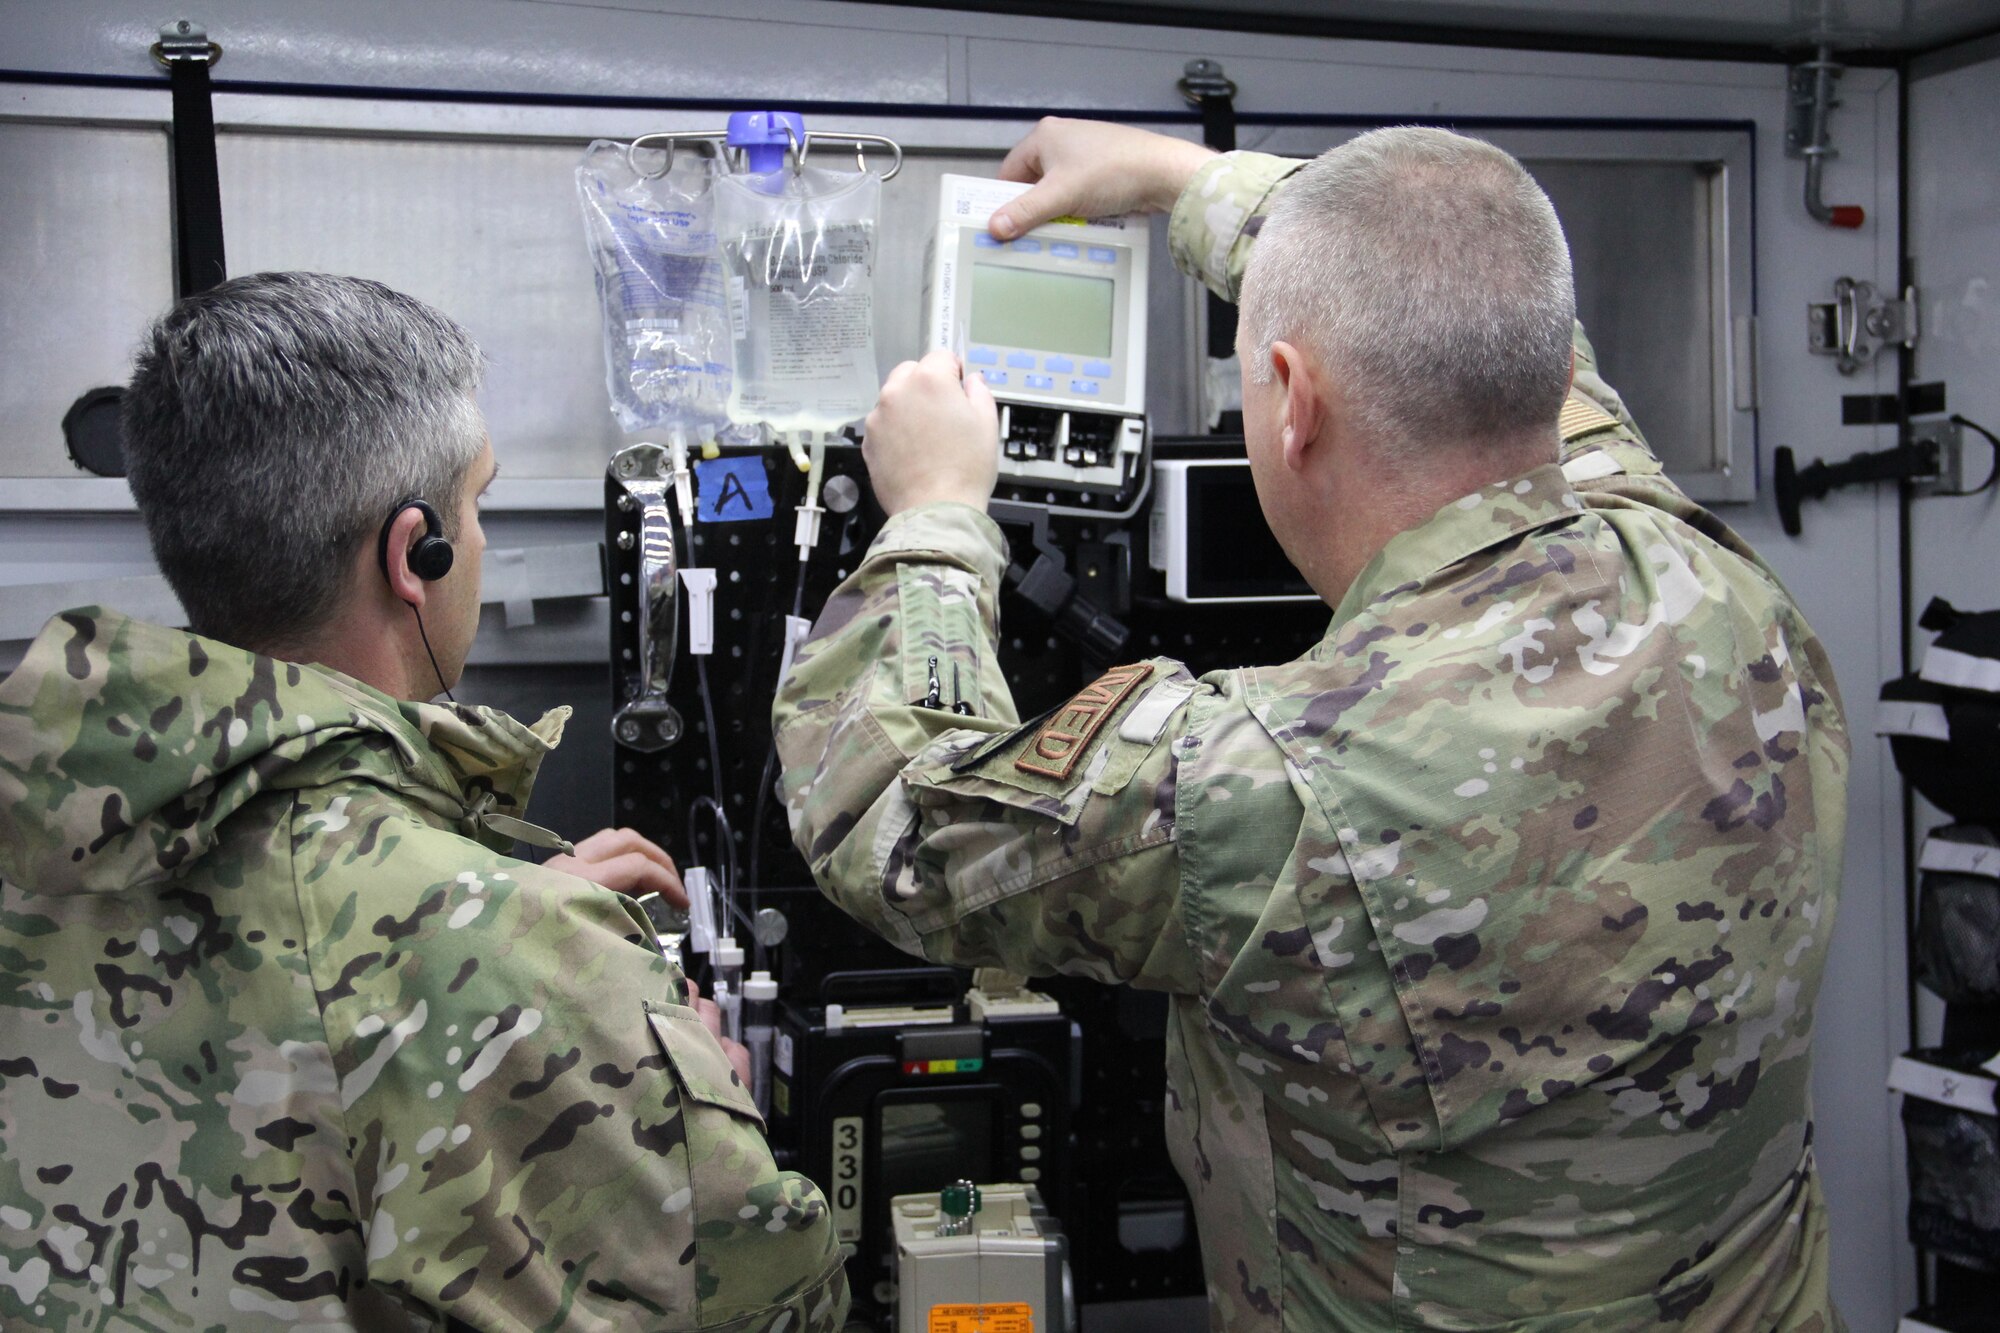 Maj. Thomas Heering, left, an austere anesthesia cadre for the GST, 711th Human Performance Wing, Air Force Research Laboratory, helps Maj. Adam Faltersack, an anesthesia element chief, 81st Surgical Operations Squadron, Keesler Air Force Base, Mississippi, set up prototype A of the tactical anesthesia workstation (TAW), for the first time April 8, 2022, during a Ground Surgical Team (GST), training course at U.S. Air Force School of Aerospace Medicine at Wright-Patterson Air Force Base, Ohio. Heering submitted the TAW idea to Spark Tank in 2021, and the idea moved forward with a team of engineers in the rapid prototyping cell (RPC). The RPC team developed the three prototypes for testing beginning in January 2022, and have since narrowed it down to one winning prototype. The team with push the recommended prototype to the GST pilot group for further deliberation. (U.S. Air Force photo/Aleah Castrejon)